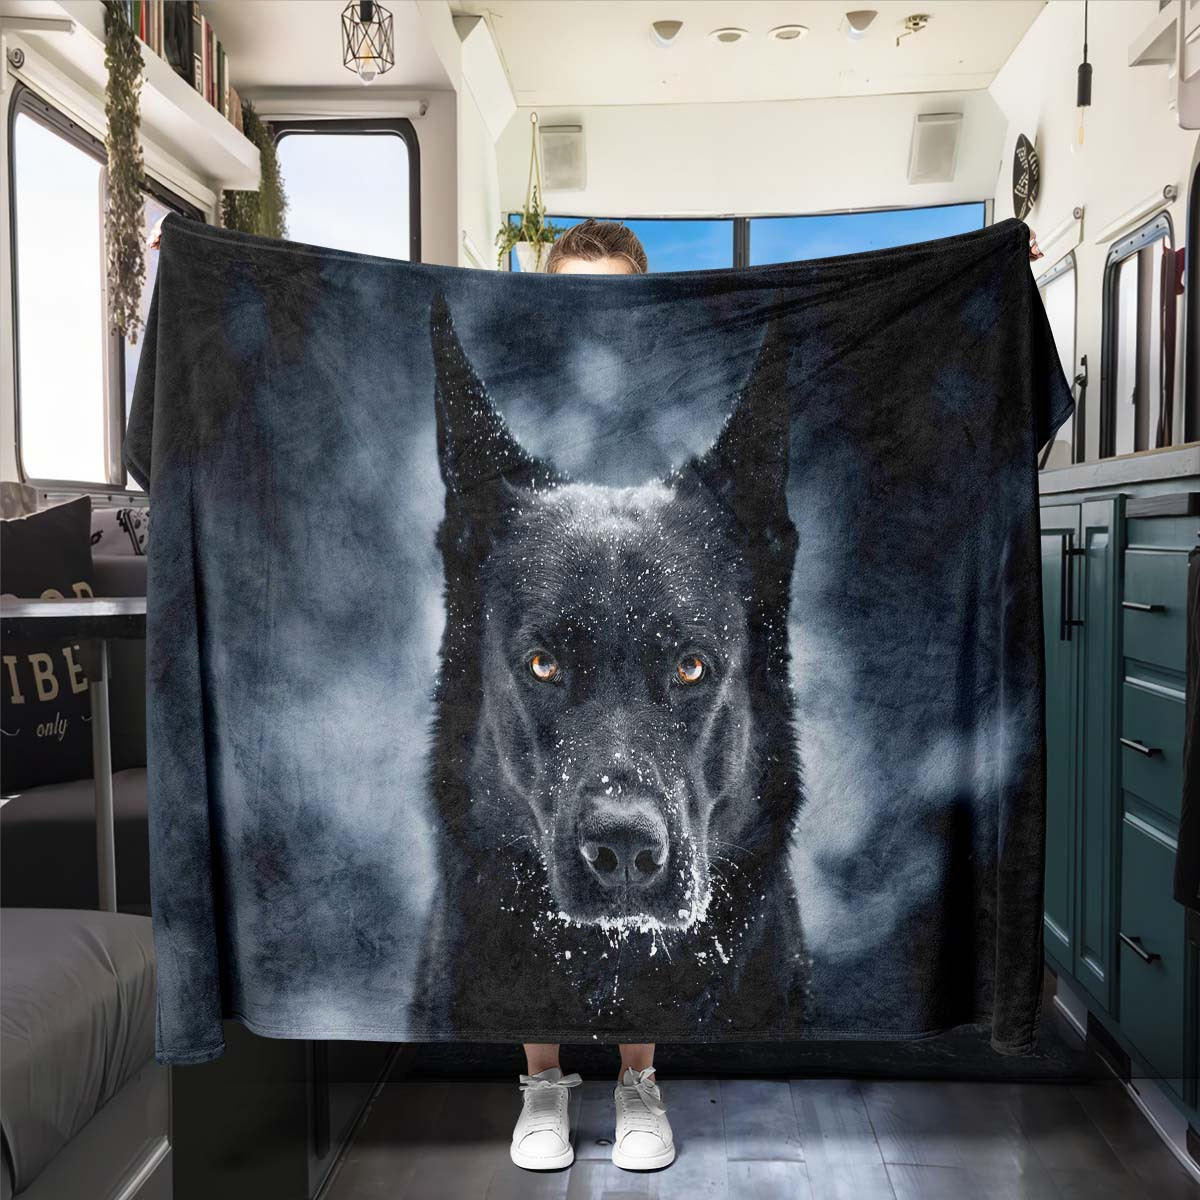 

Black German Shepherd Dog Pattern Flannel Fleece Throw Blanket - Soft, Comfortable All-season Blanket For Office Chair, Home Lounging, Camping - Ideal Gift For Family Or Friends